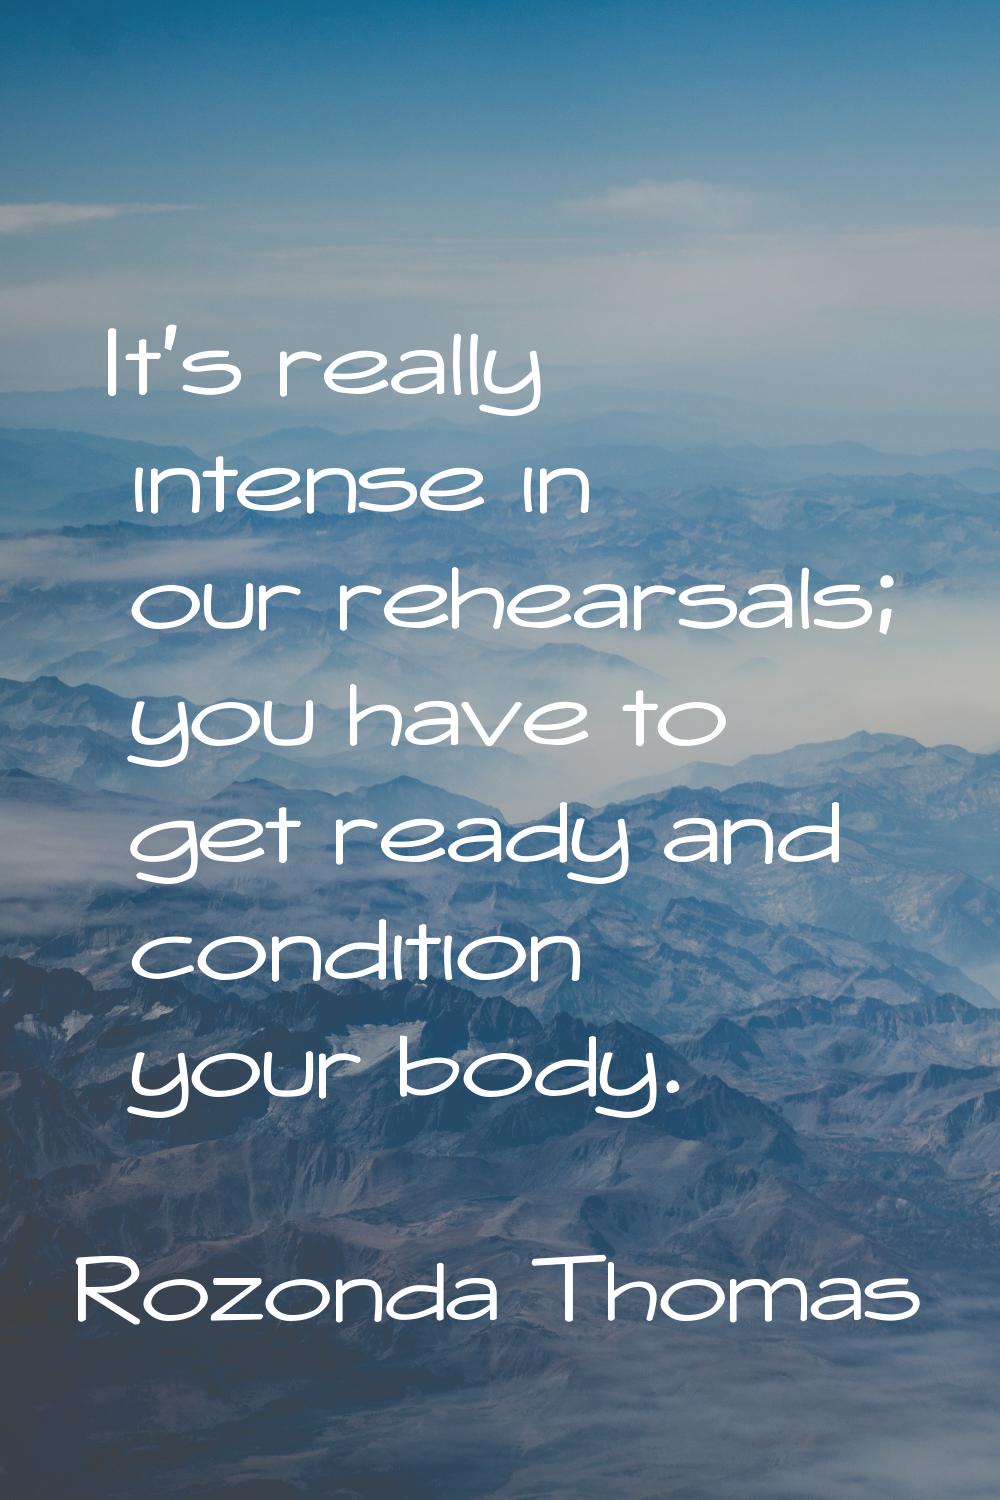 It's really intense in our rehearsals; you have to get ready and condition your body.